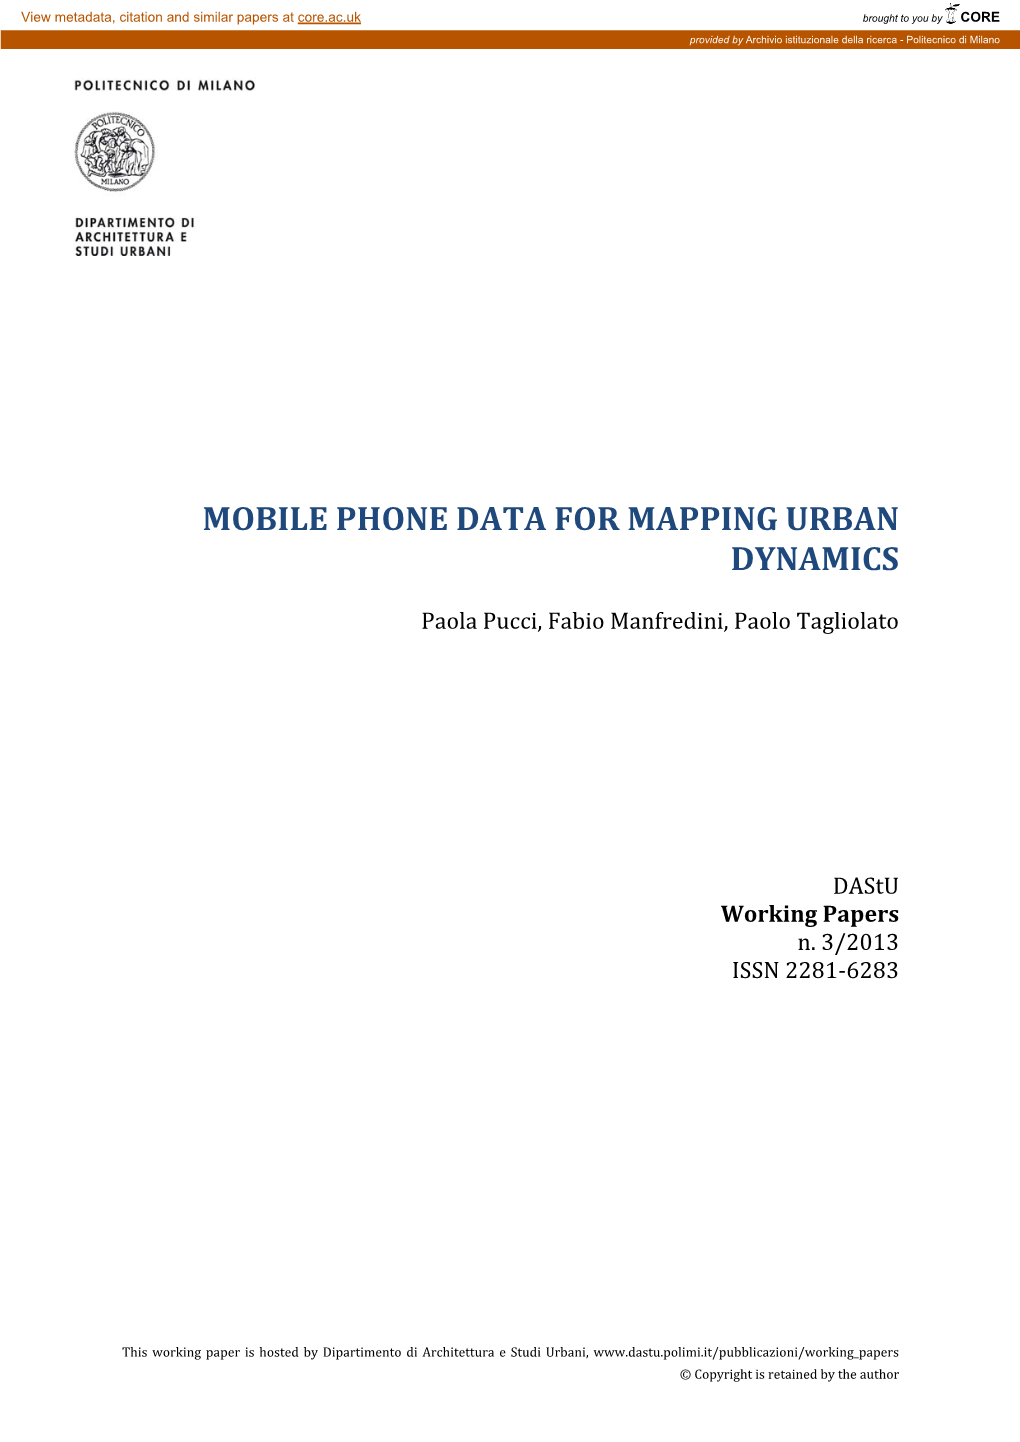 Mobile Phone Data for Mapping Urban Dynamics